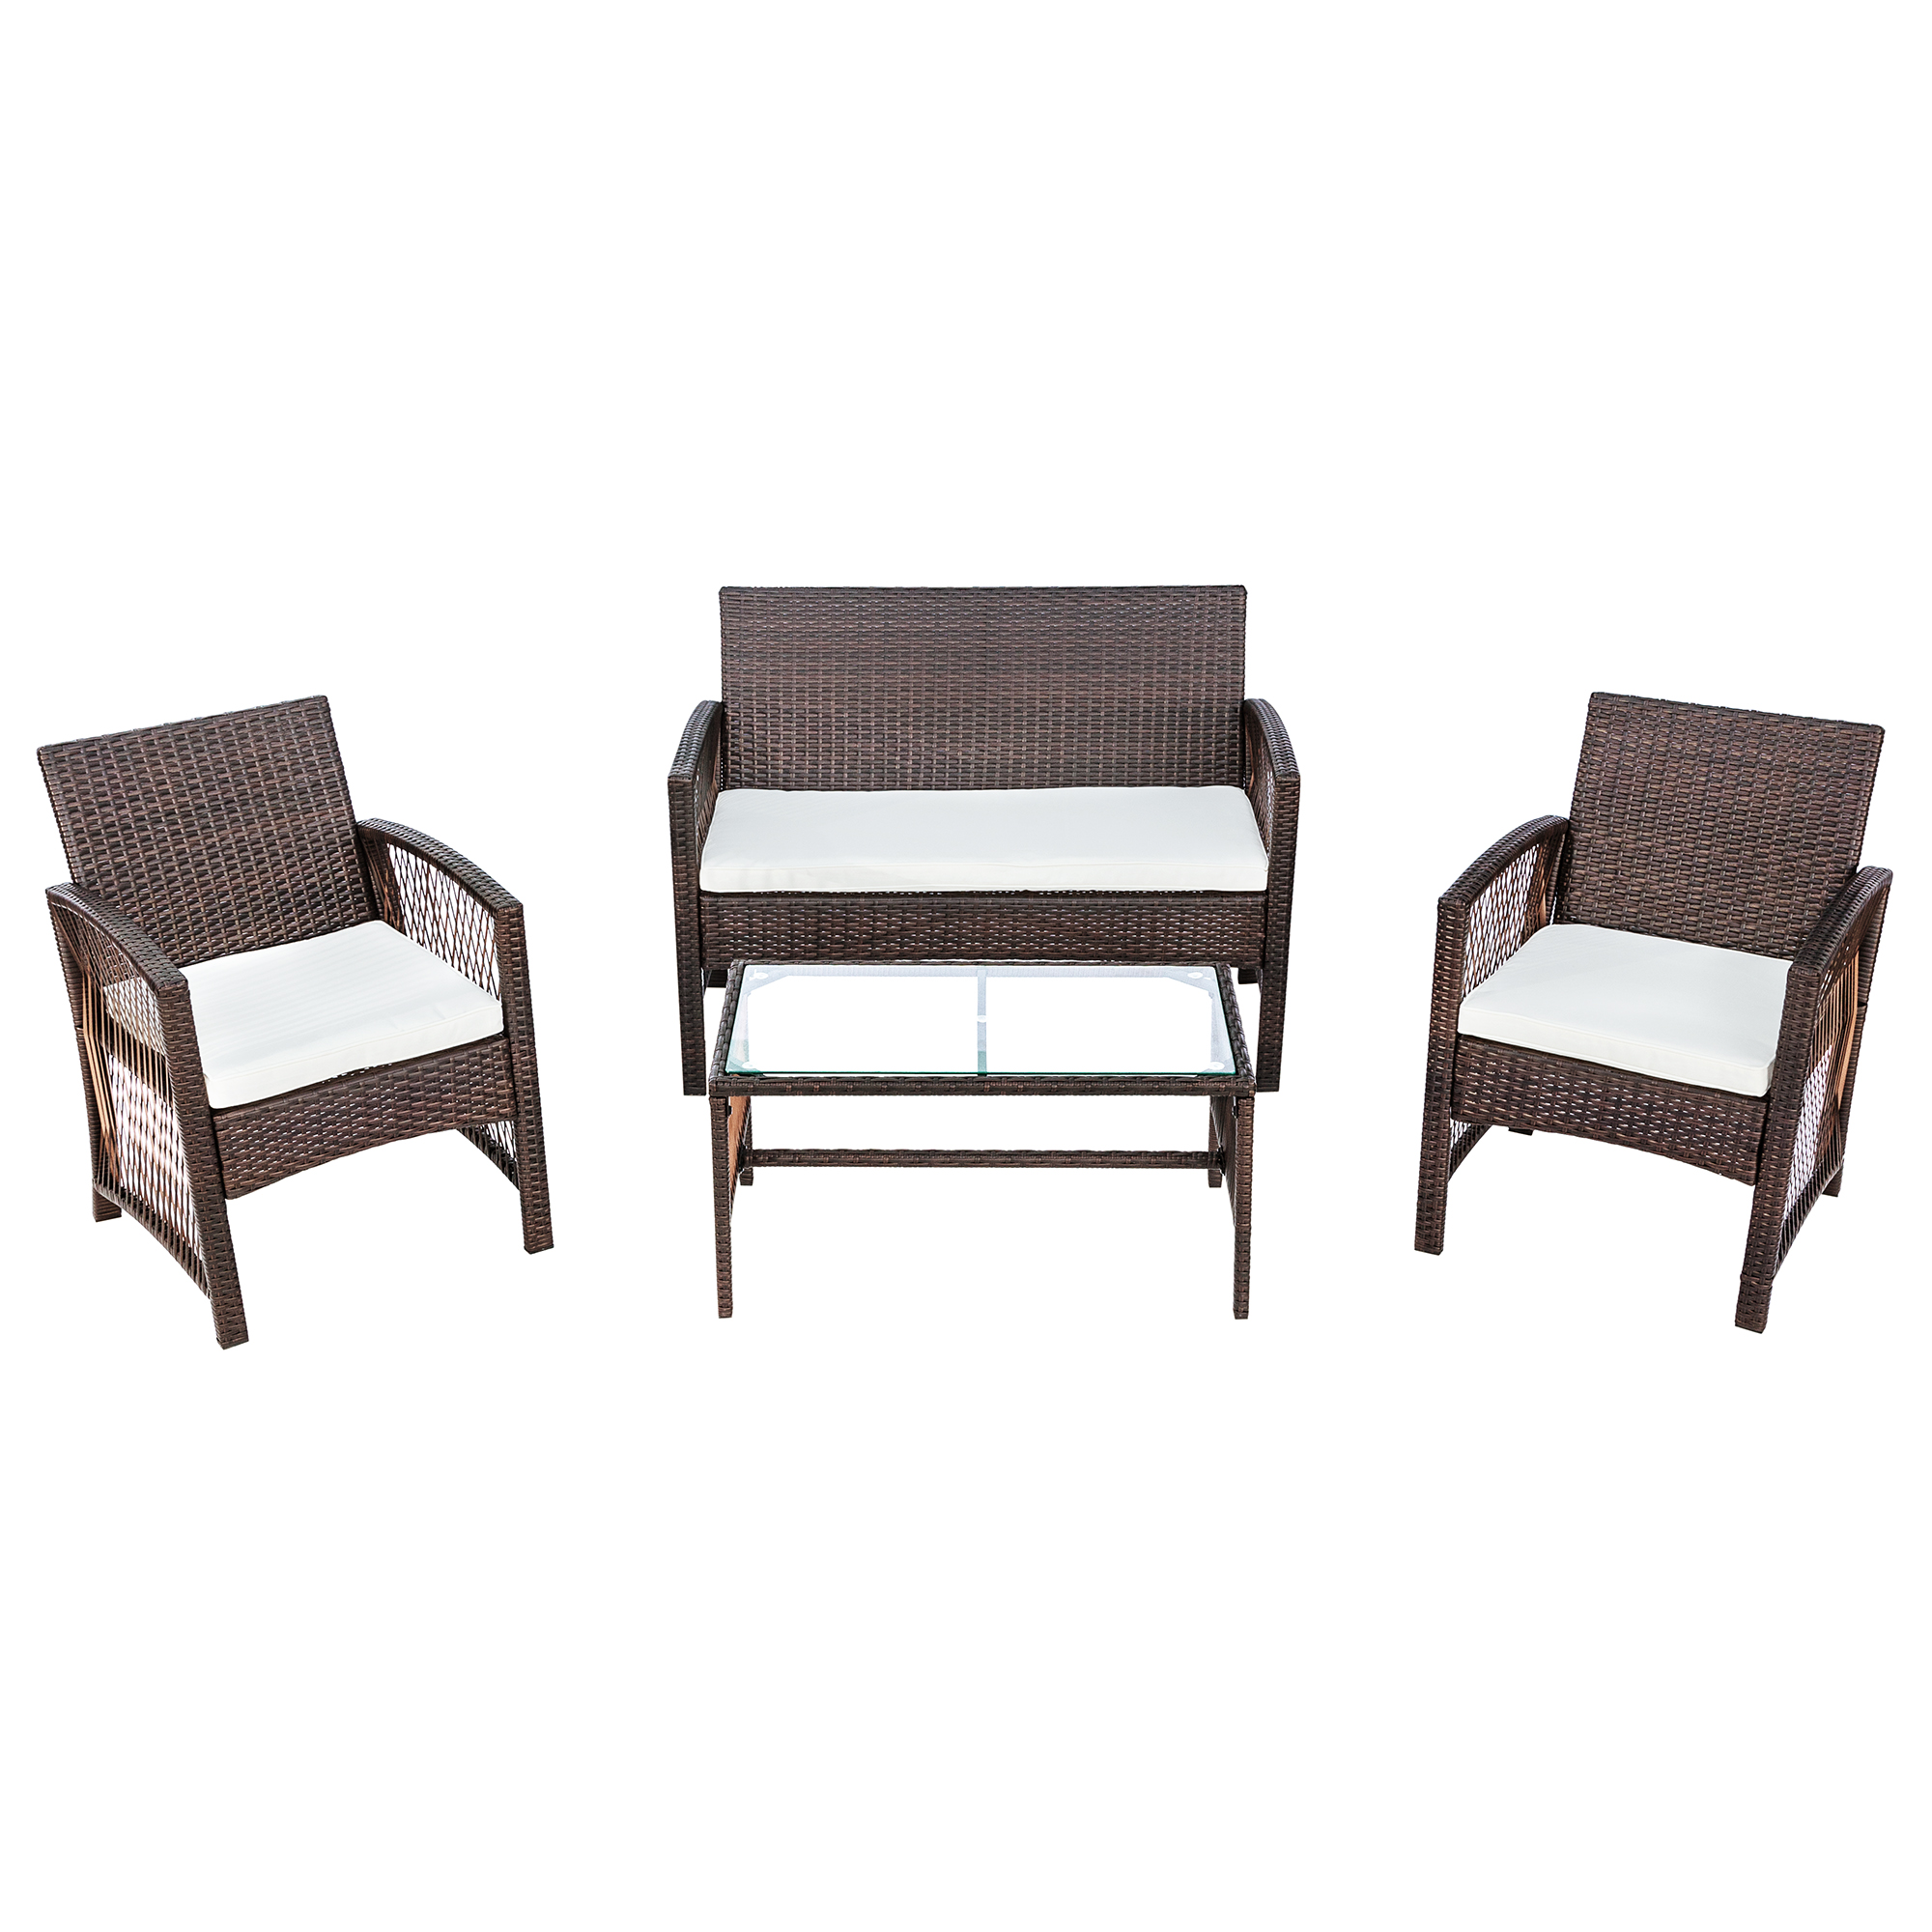 Patio Outdoor Furniture Sets, UHOMEPRO 4 Pieces PE Rattan Garden Furniture Wicker Chairs Set with Coffee Table, Outdoor Conversation Sets, Patio Dining Set for Backyard Poolside Porch, Brown, W7763 - image 5 of 11